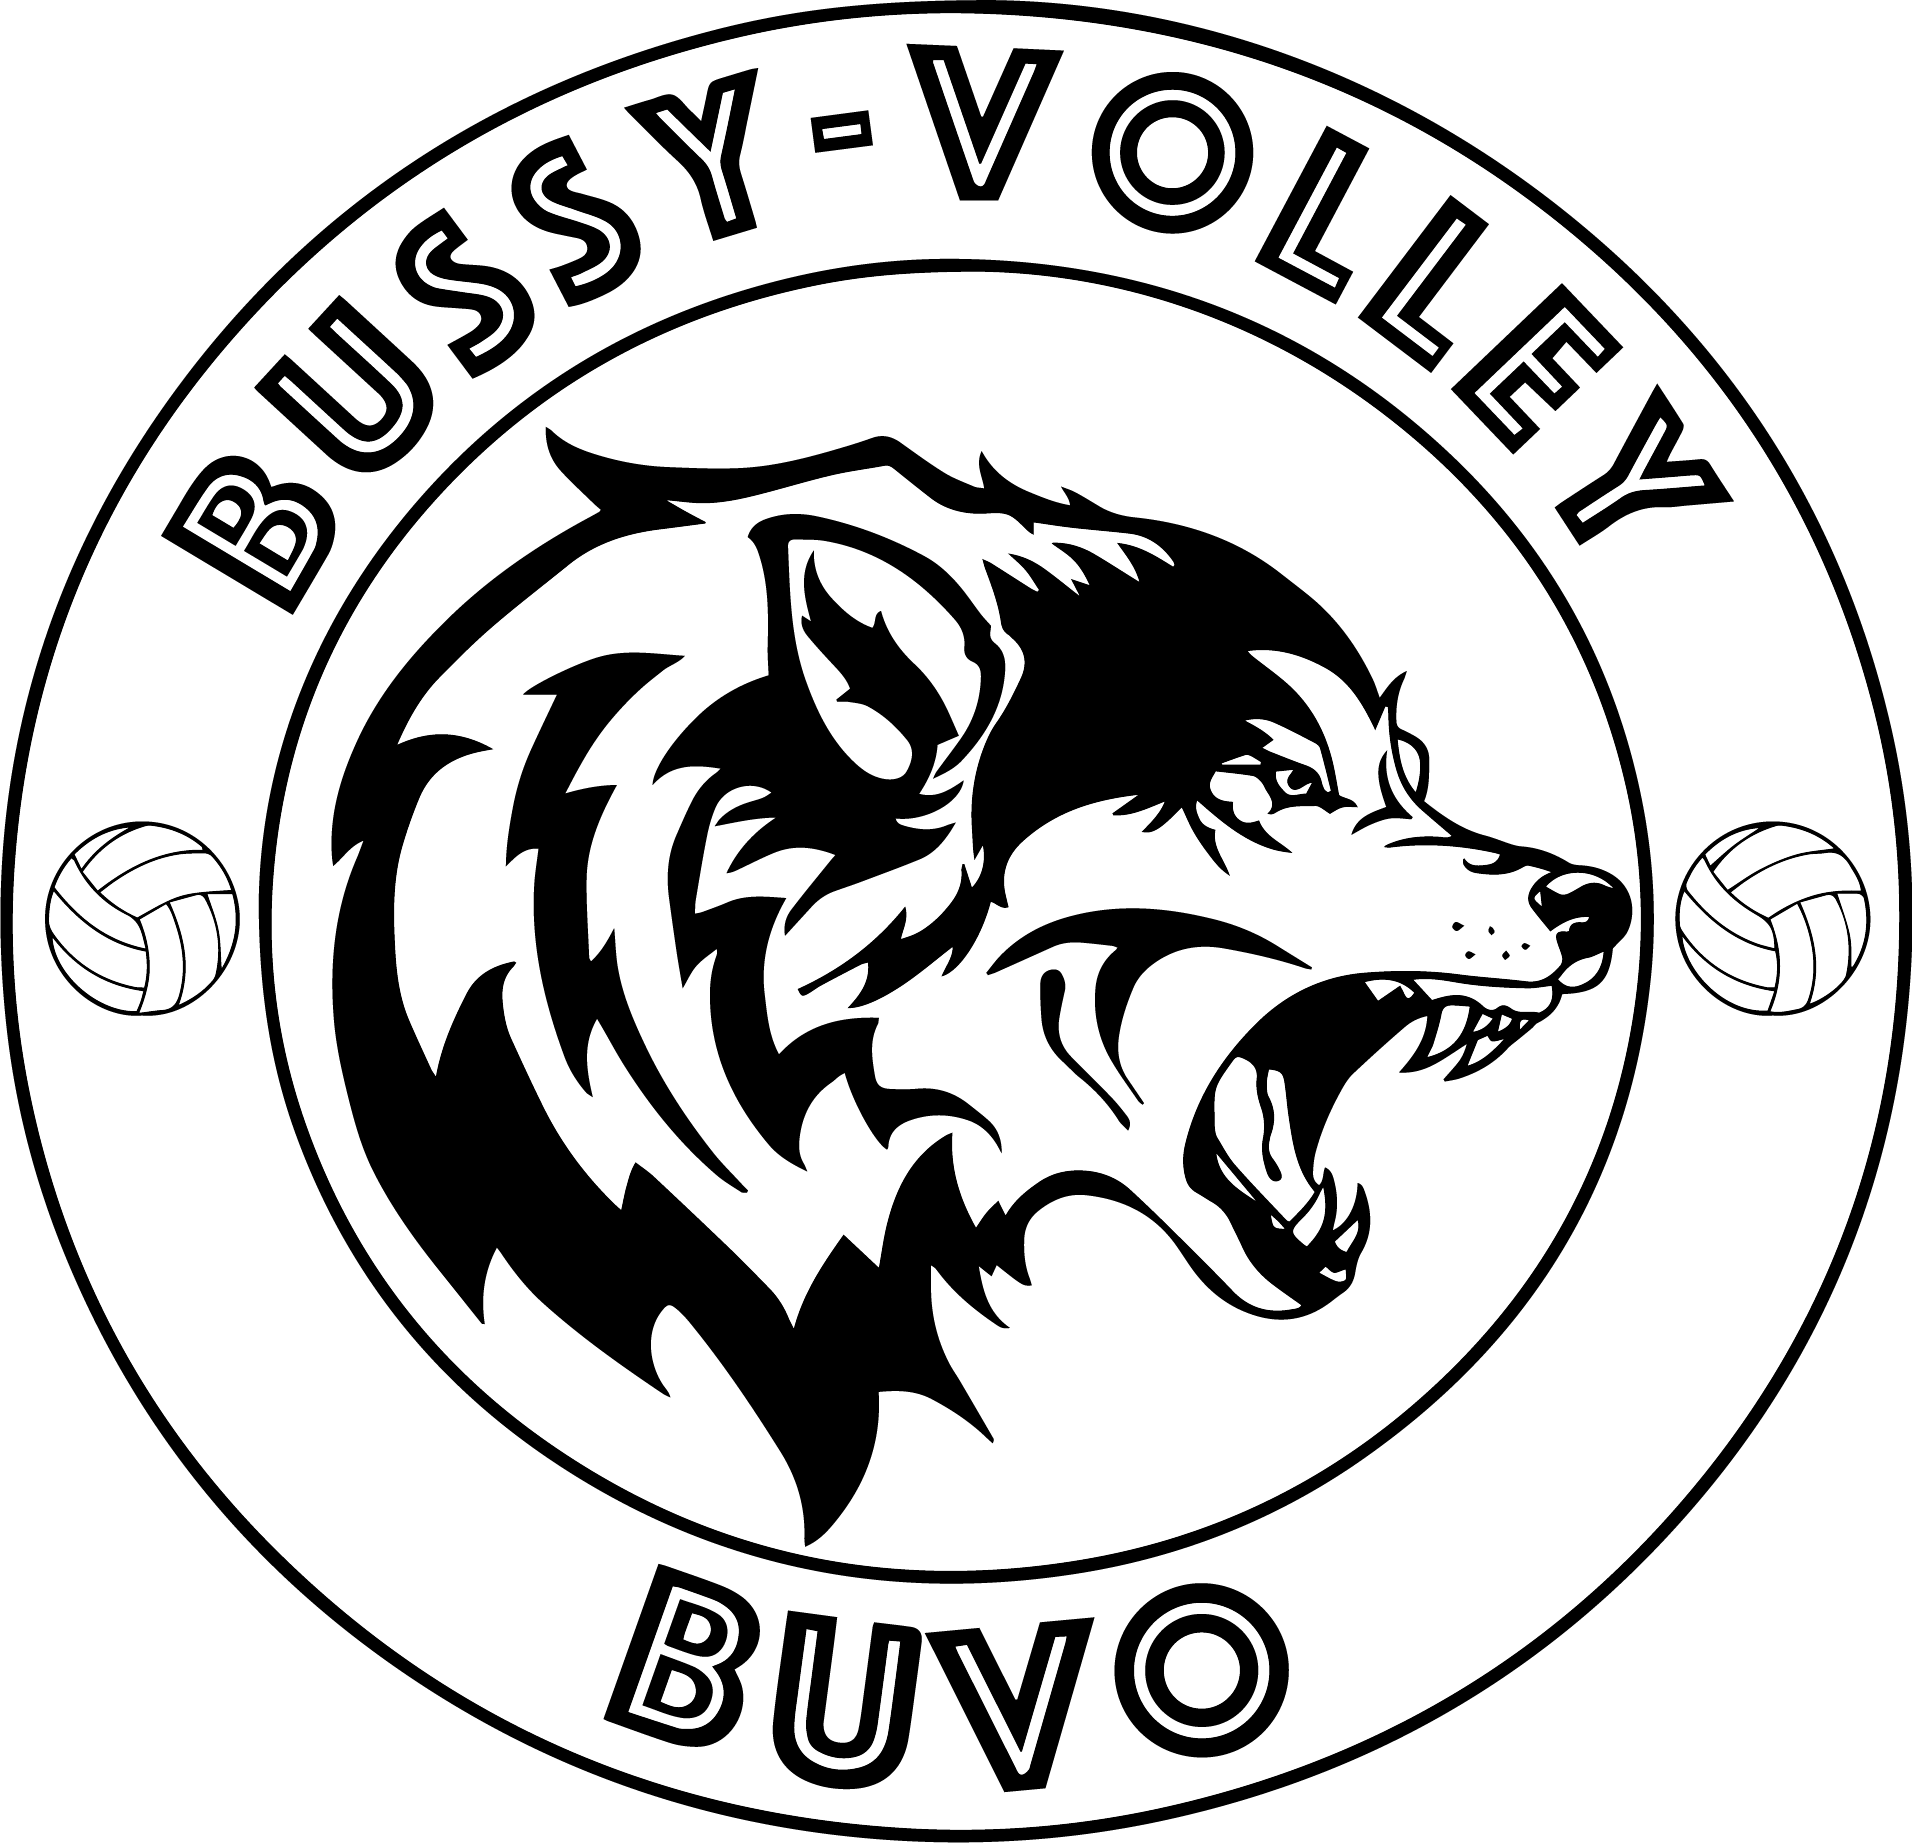 Bussy Volley